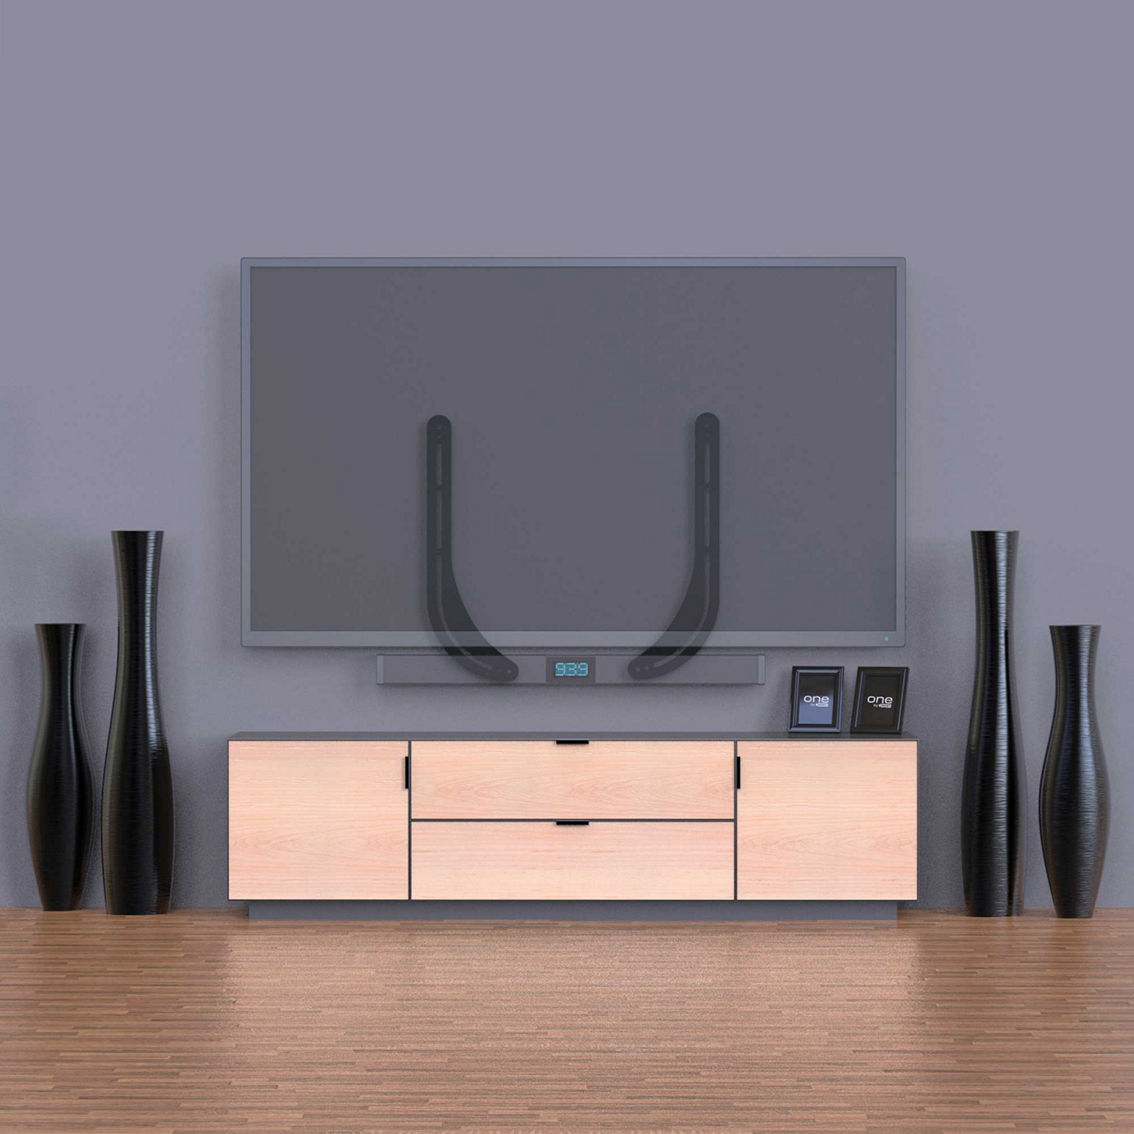 Promounts  Sound Bar Mount for TVs 10 to 90 in. - Image 7 of 7